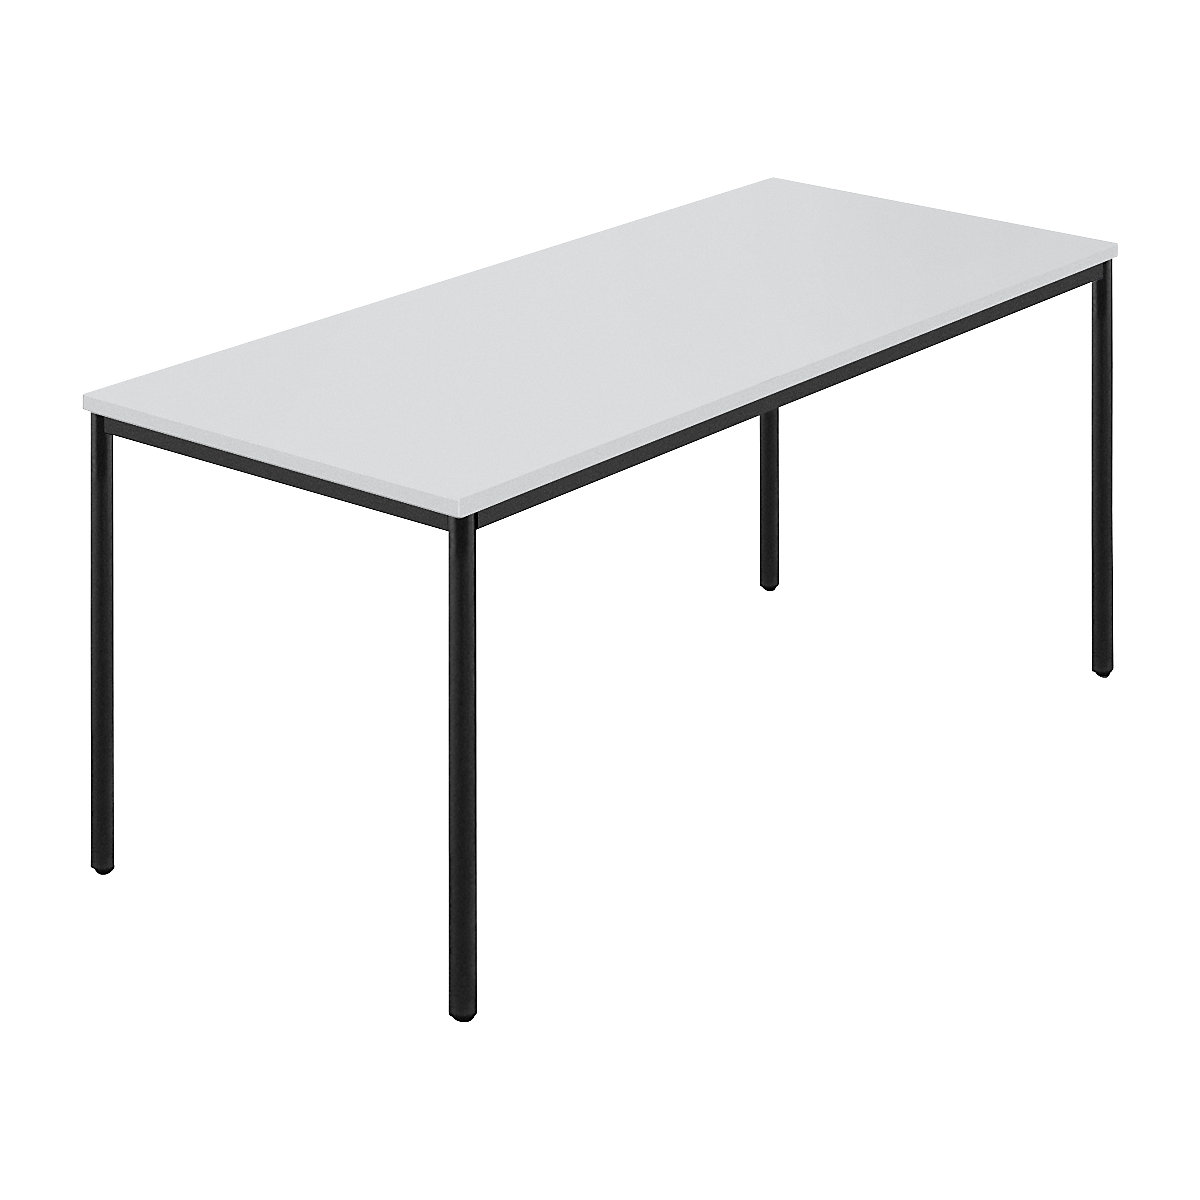 Rectangular table, coated round tubing, WxD 1600 x 800 mm, grey / anthracite-5